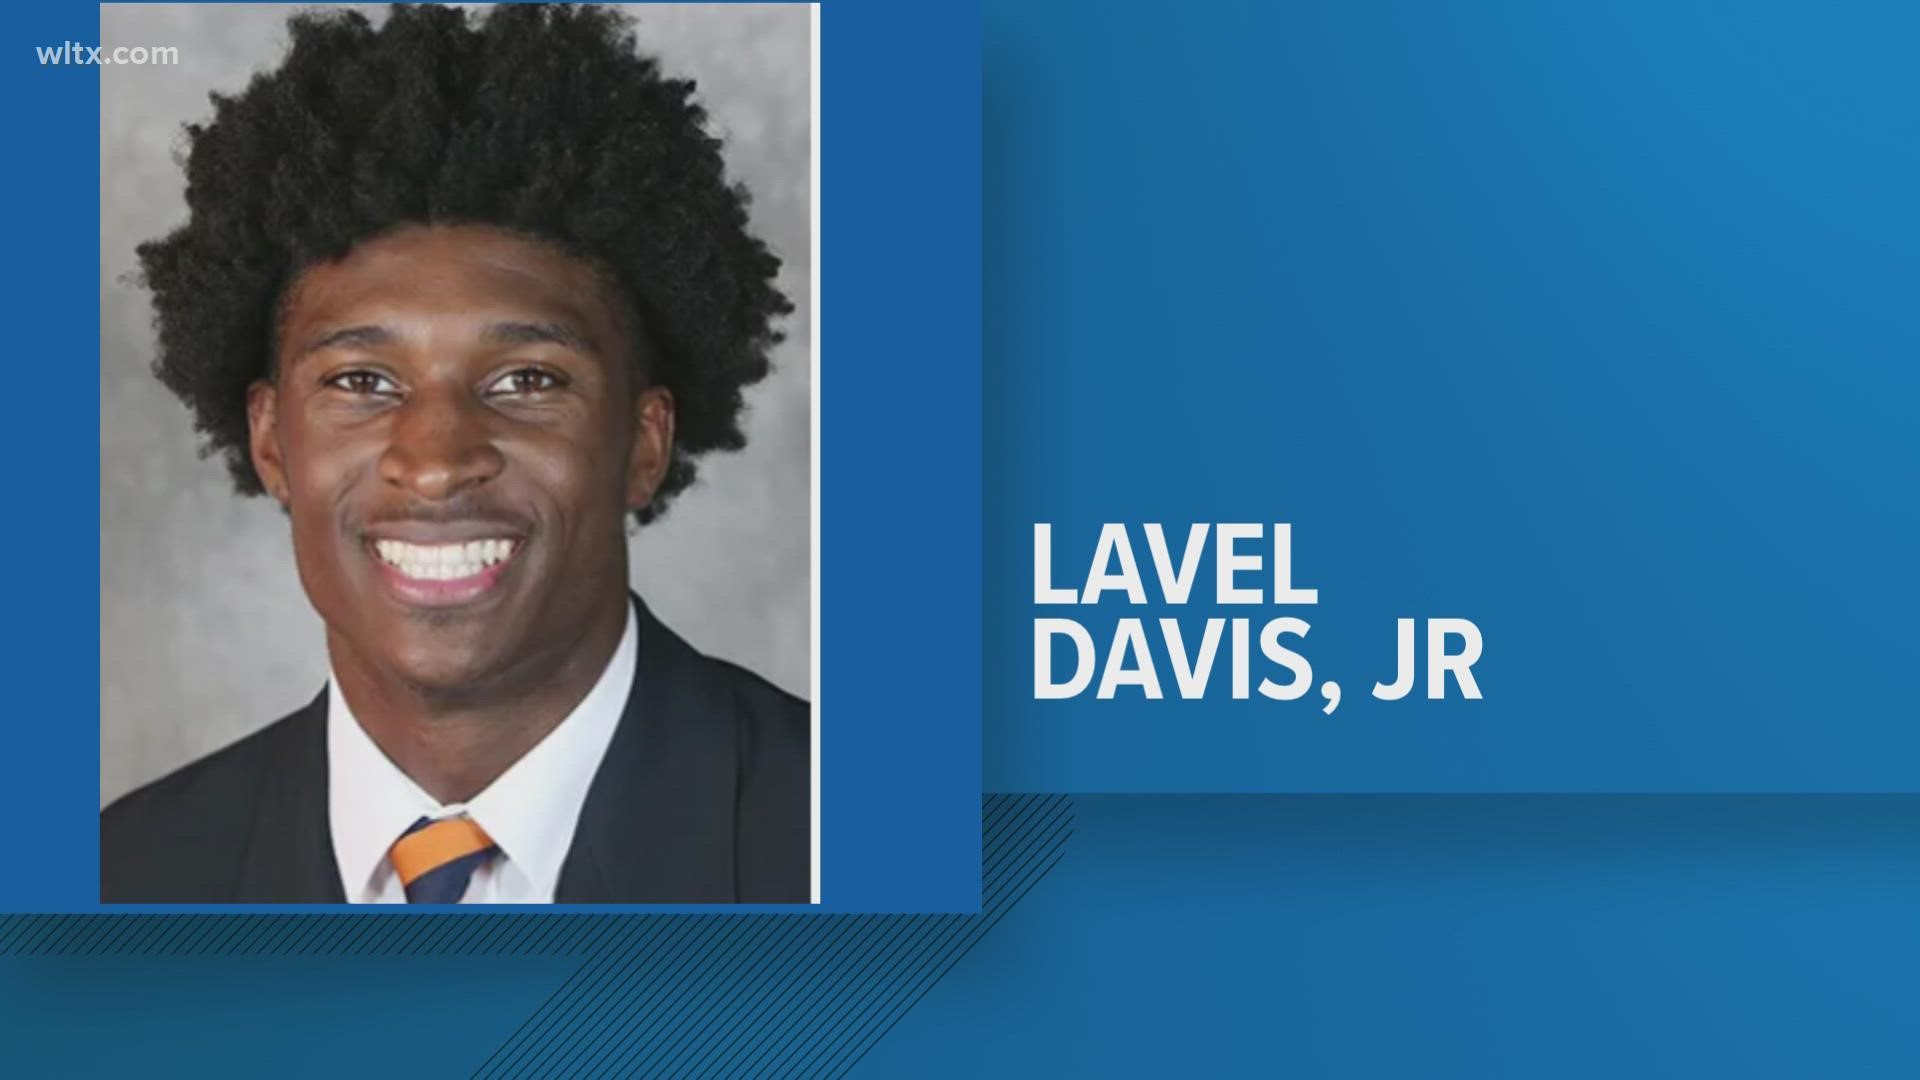 Lavel Davis Jr. was a junior wide receiver for the Virginia Cavaliers and grew up in Dorchester County, SC.